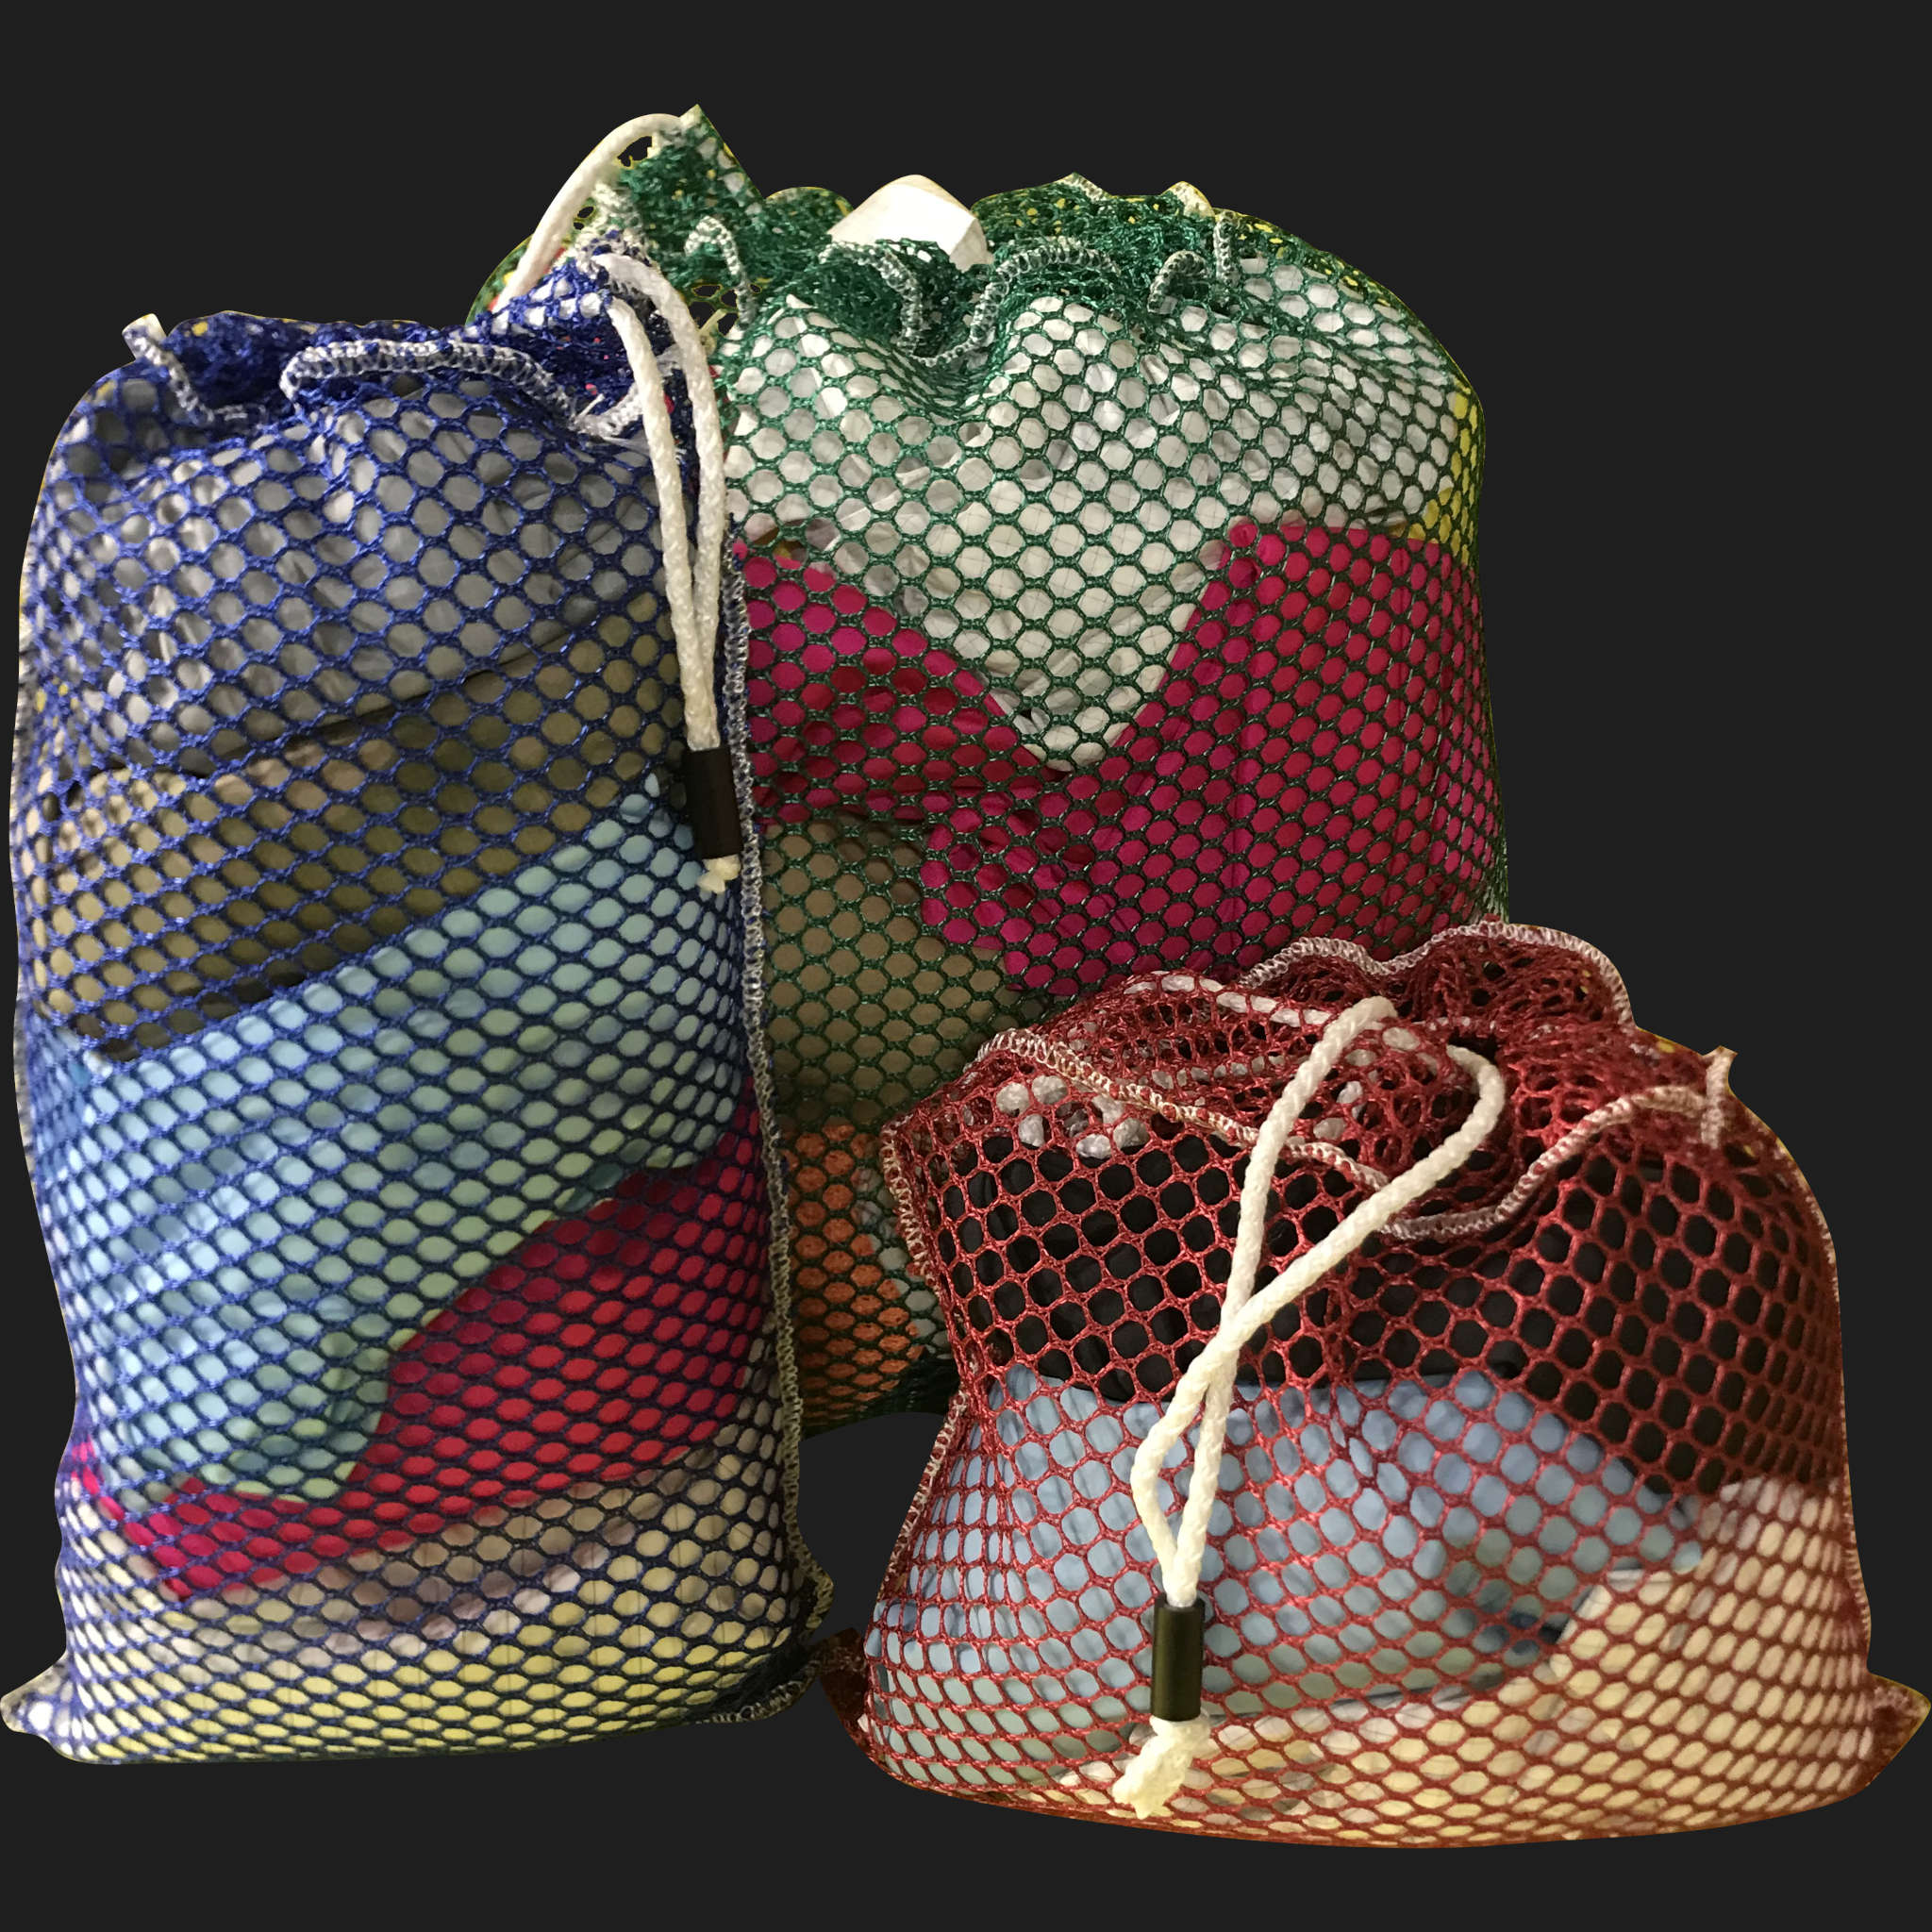 48" x 66" Customized Mesh-Net-Laundry Bags Heavy Duty with Cord and barrellock closure